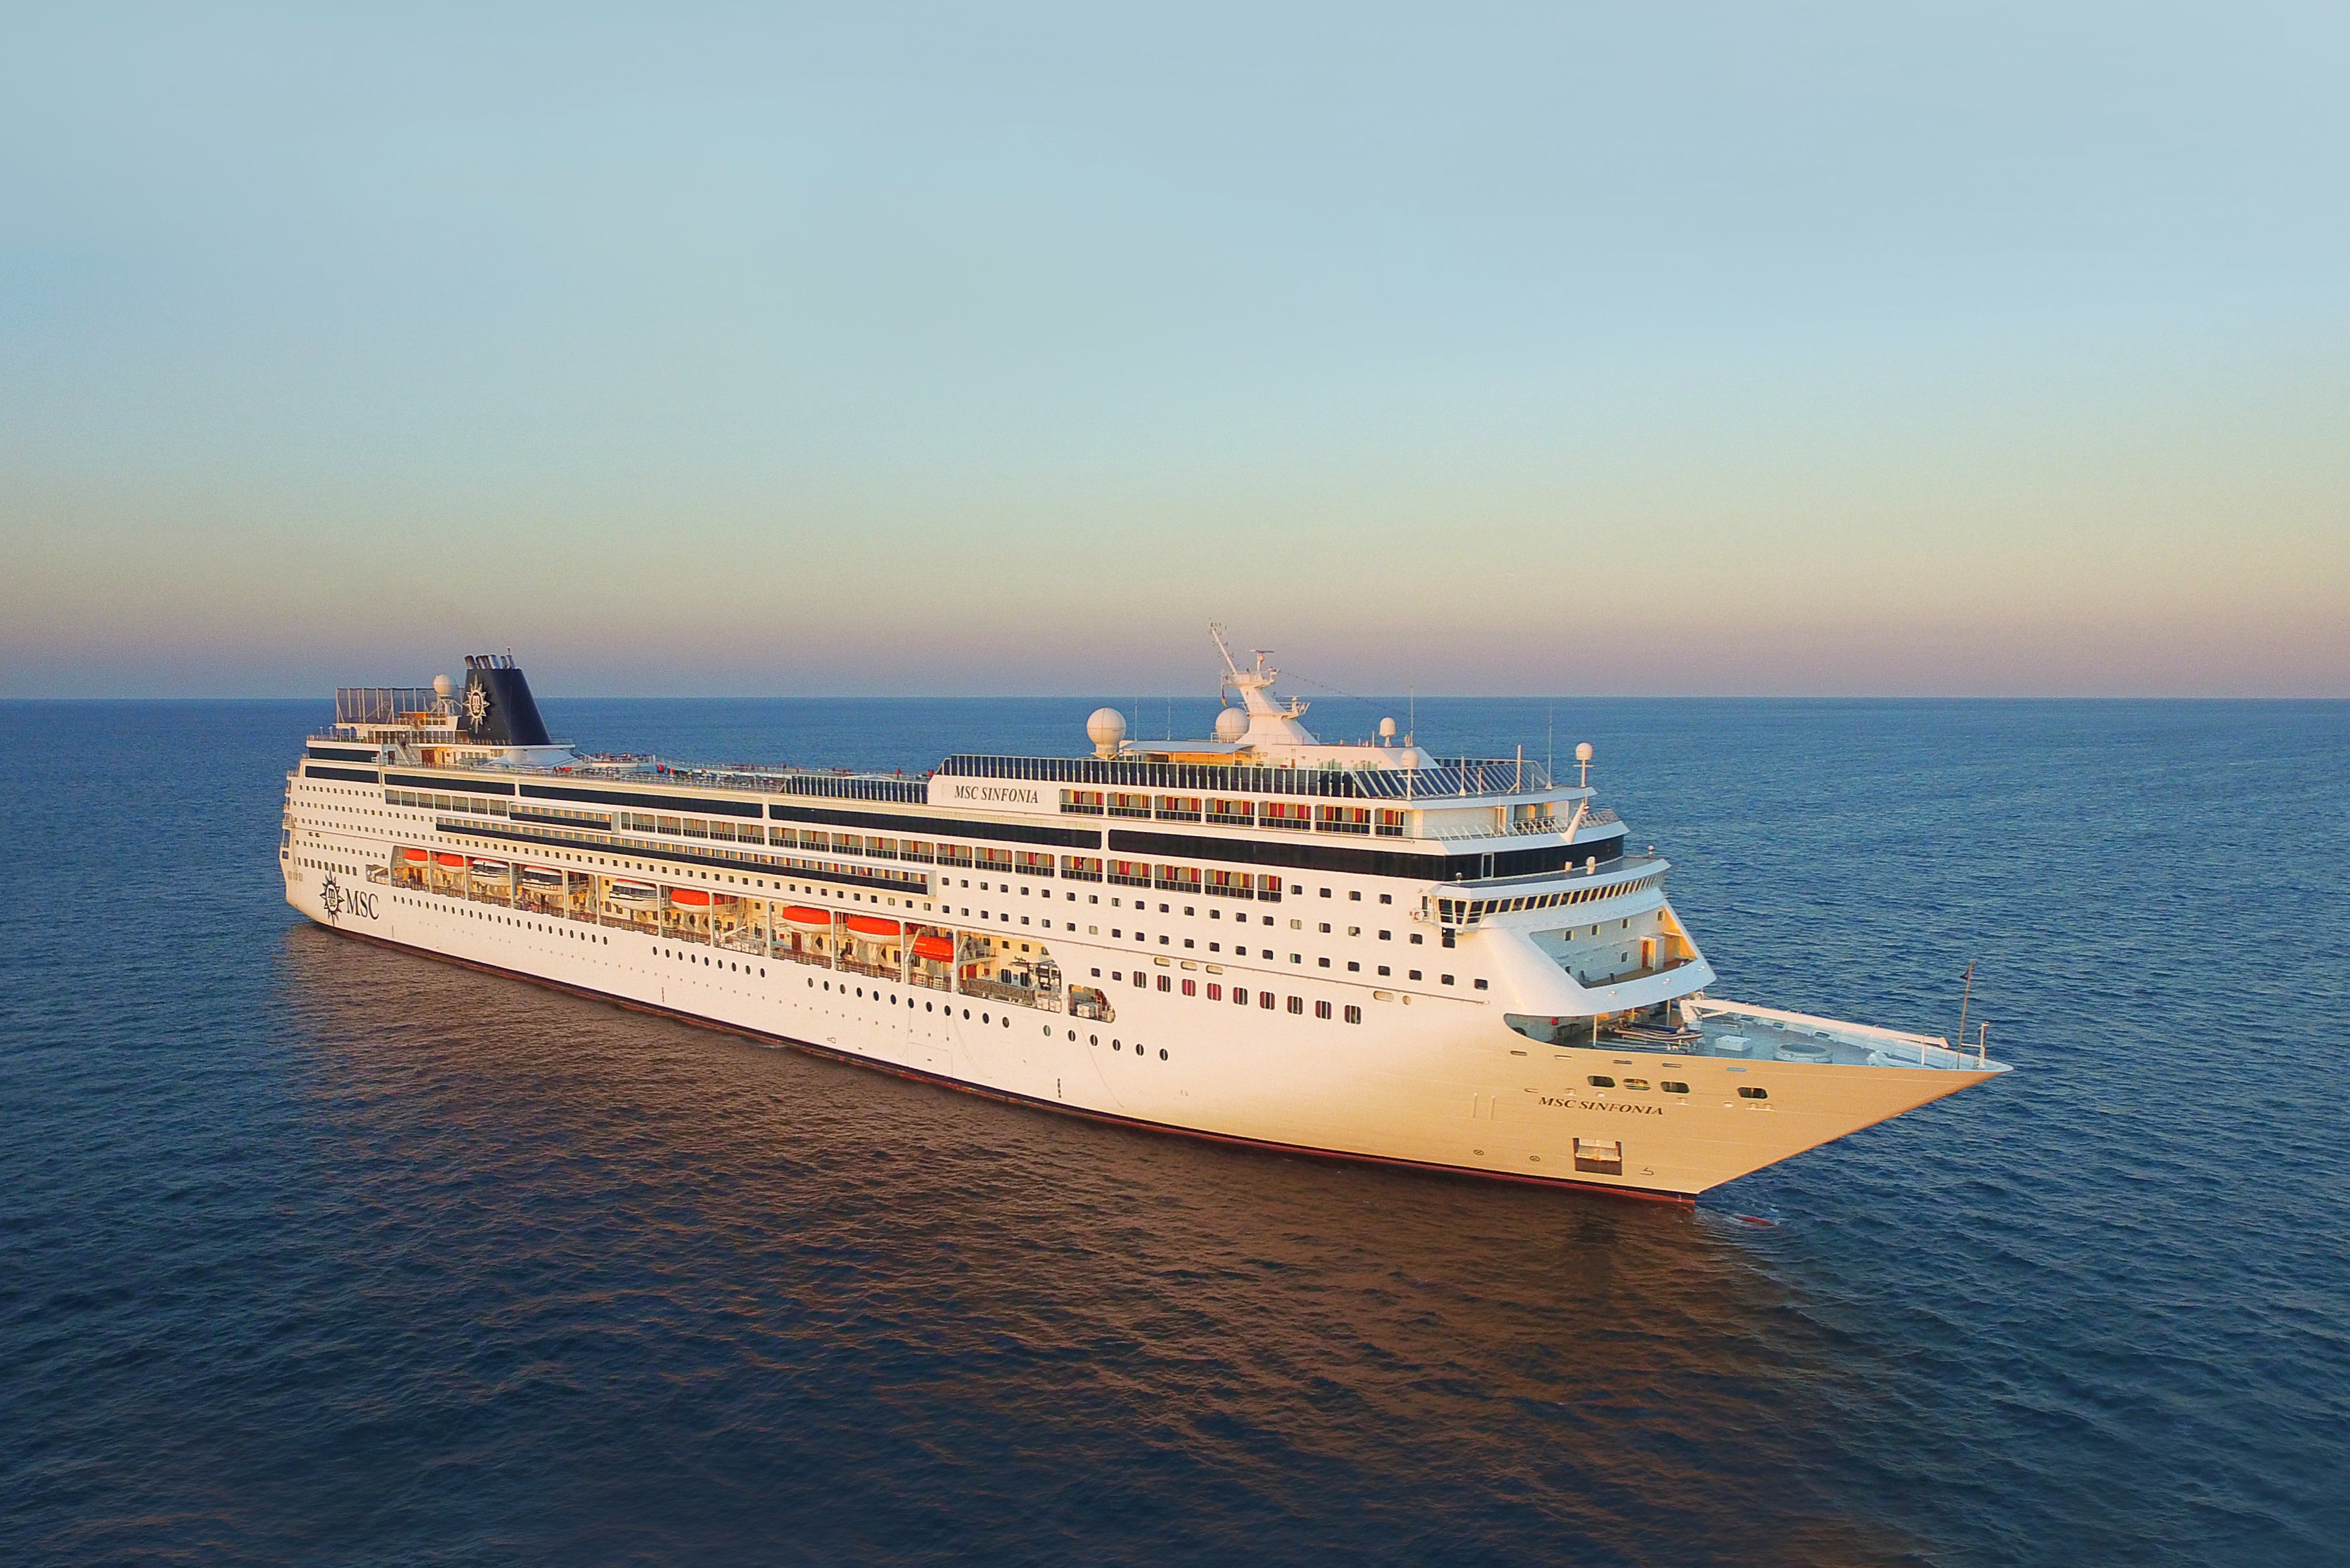 Take a table for two onboard the MSC Opera